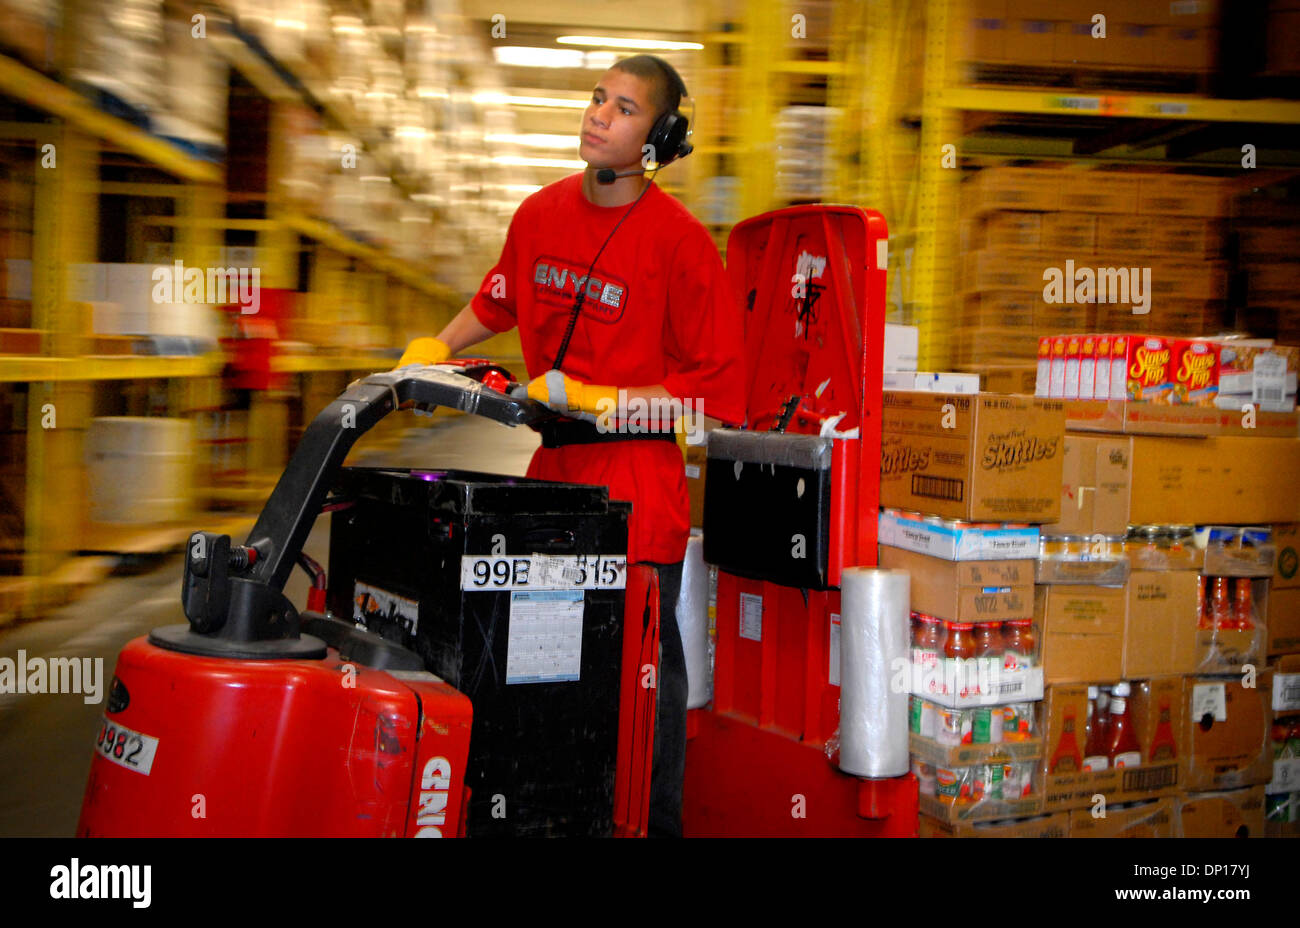 Apr 24, 2006; Hopkins, MN, USA; With a computer radio voice in his ear giving him instructions, Marcell Graham rides the aisles of the 473,000 square foot Supervalu distribution center in Hopkins gathering orders for stores.  The company is building an additional highly automated 579,000 square foot distribution center across the street. Mandatory Credit: Photo by Glen Stubbe/Minne Stock Photo